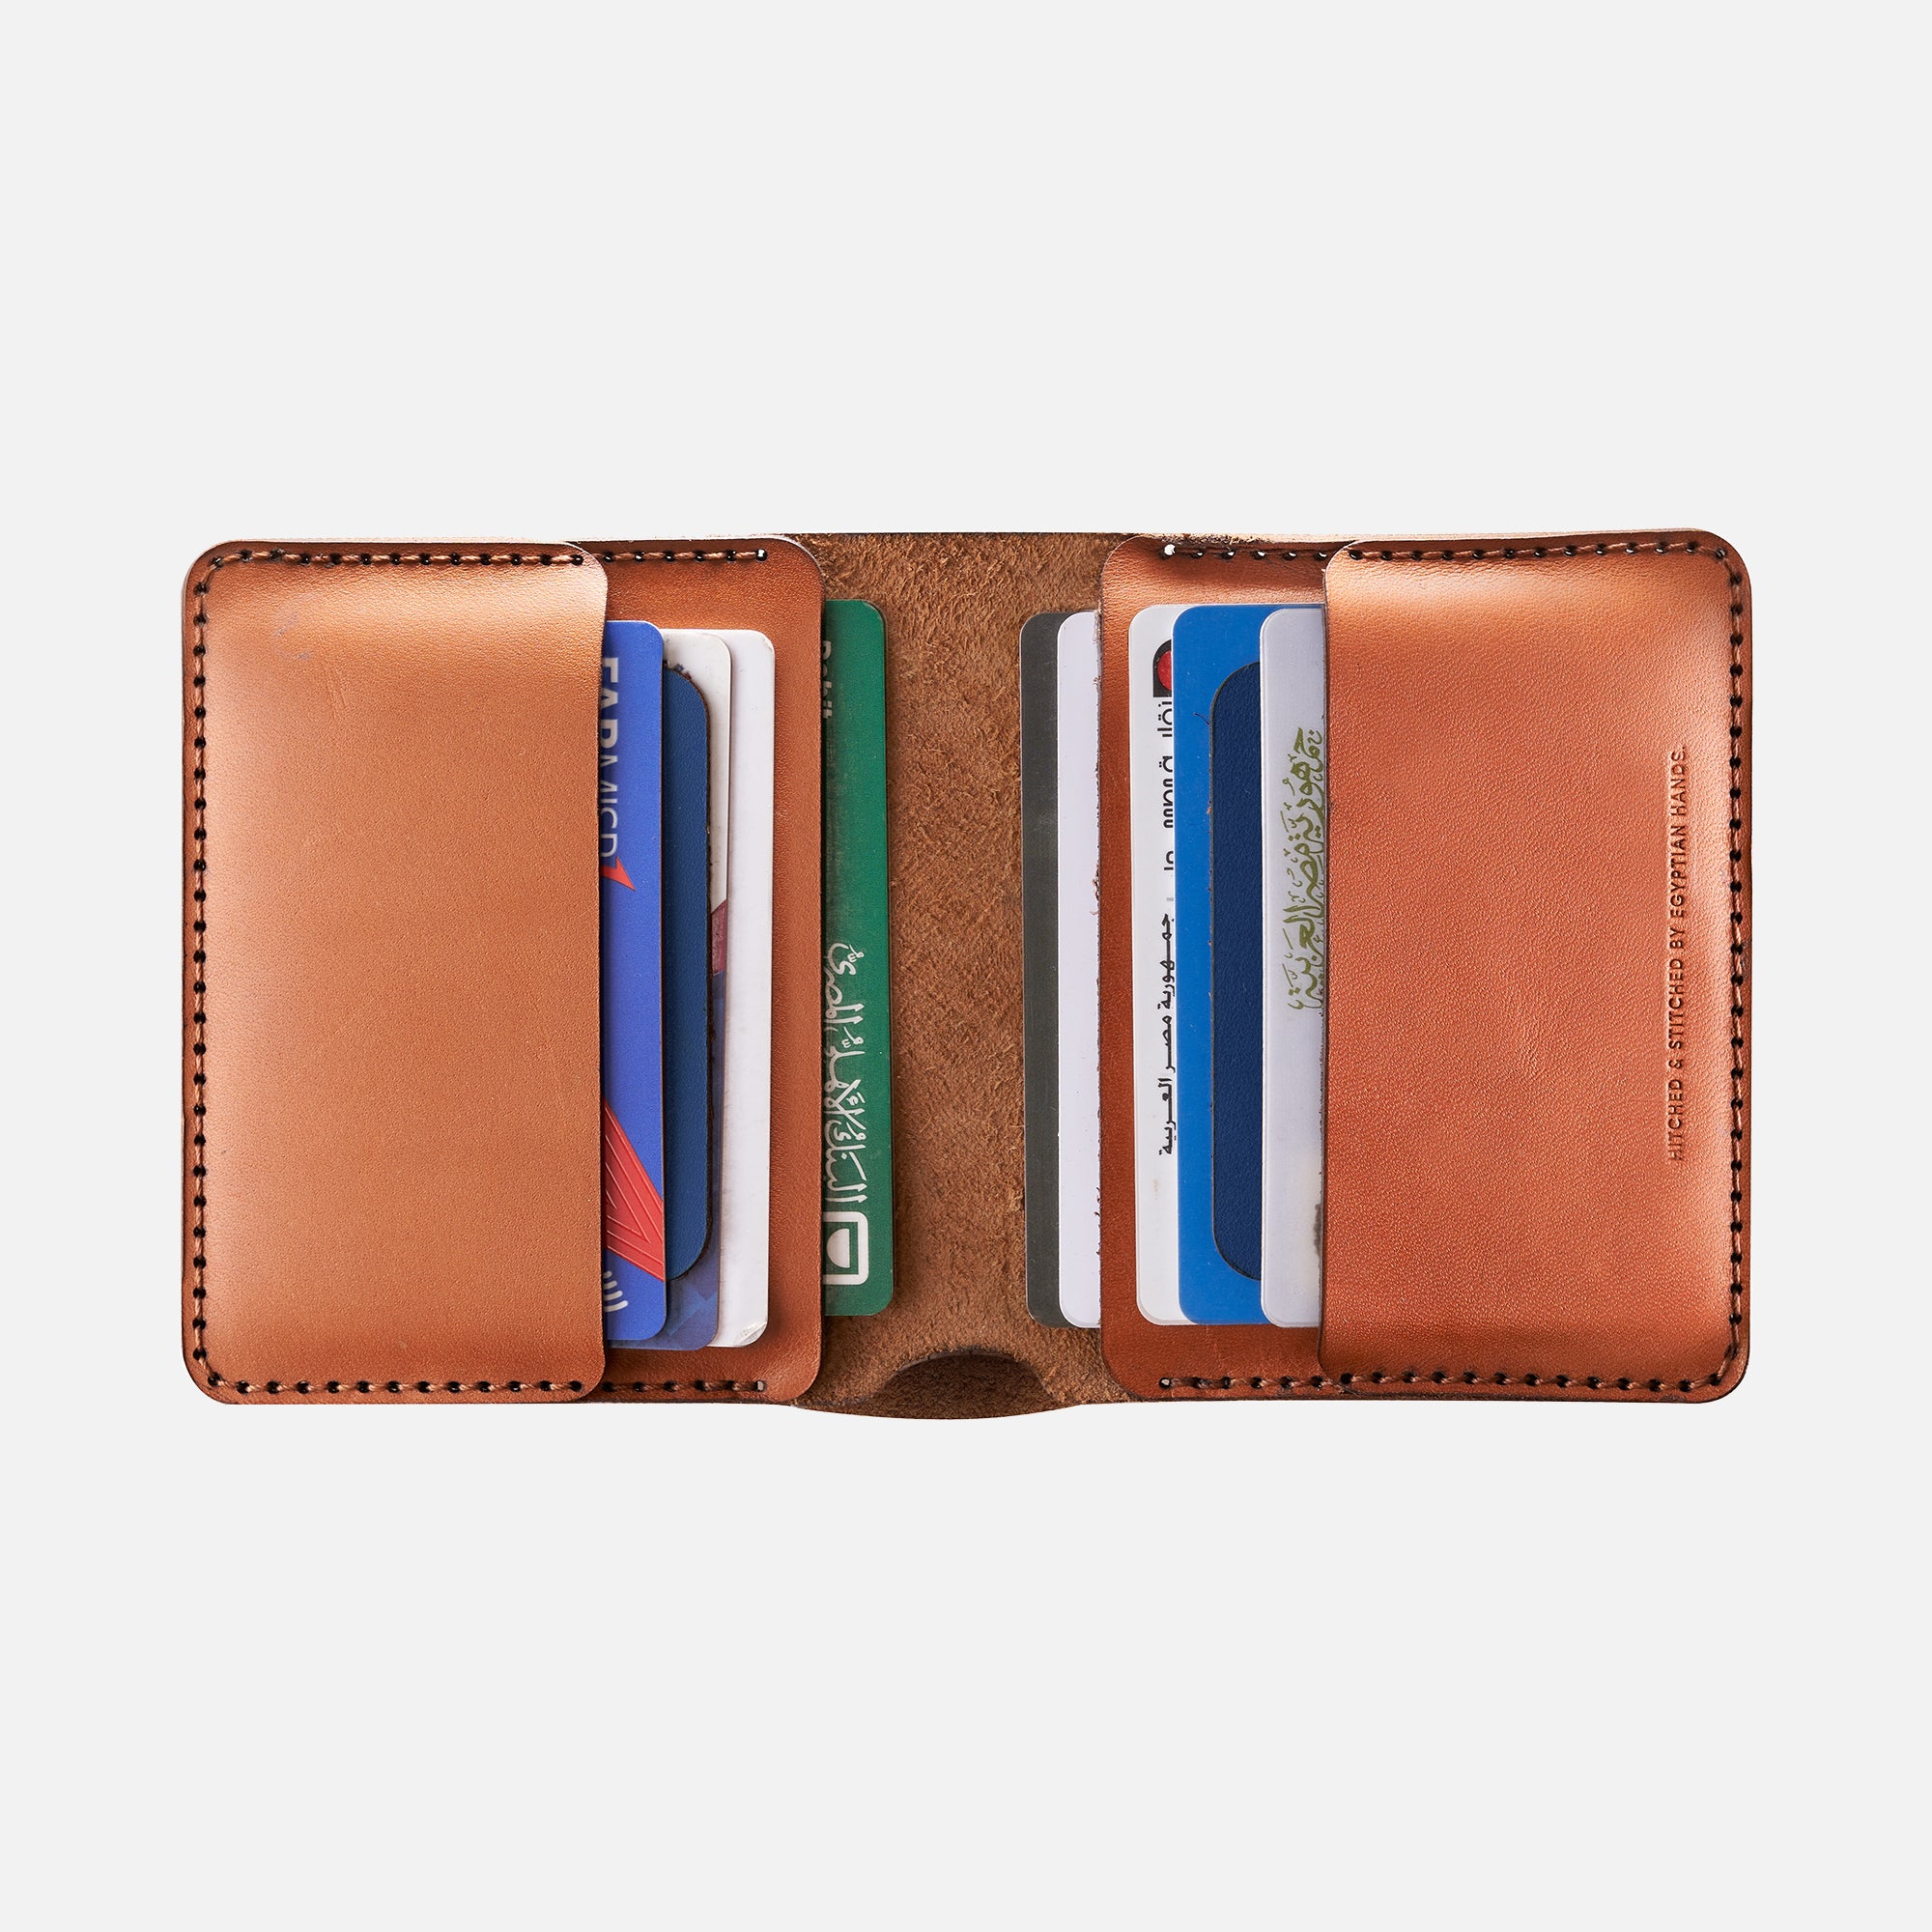 Brown leather bifold wallet with multiple credit cards inside isolated on white background.